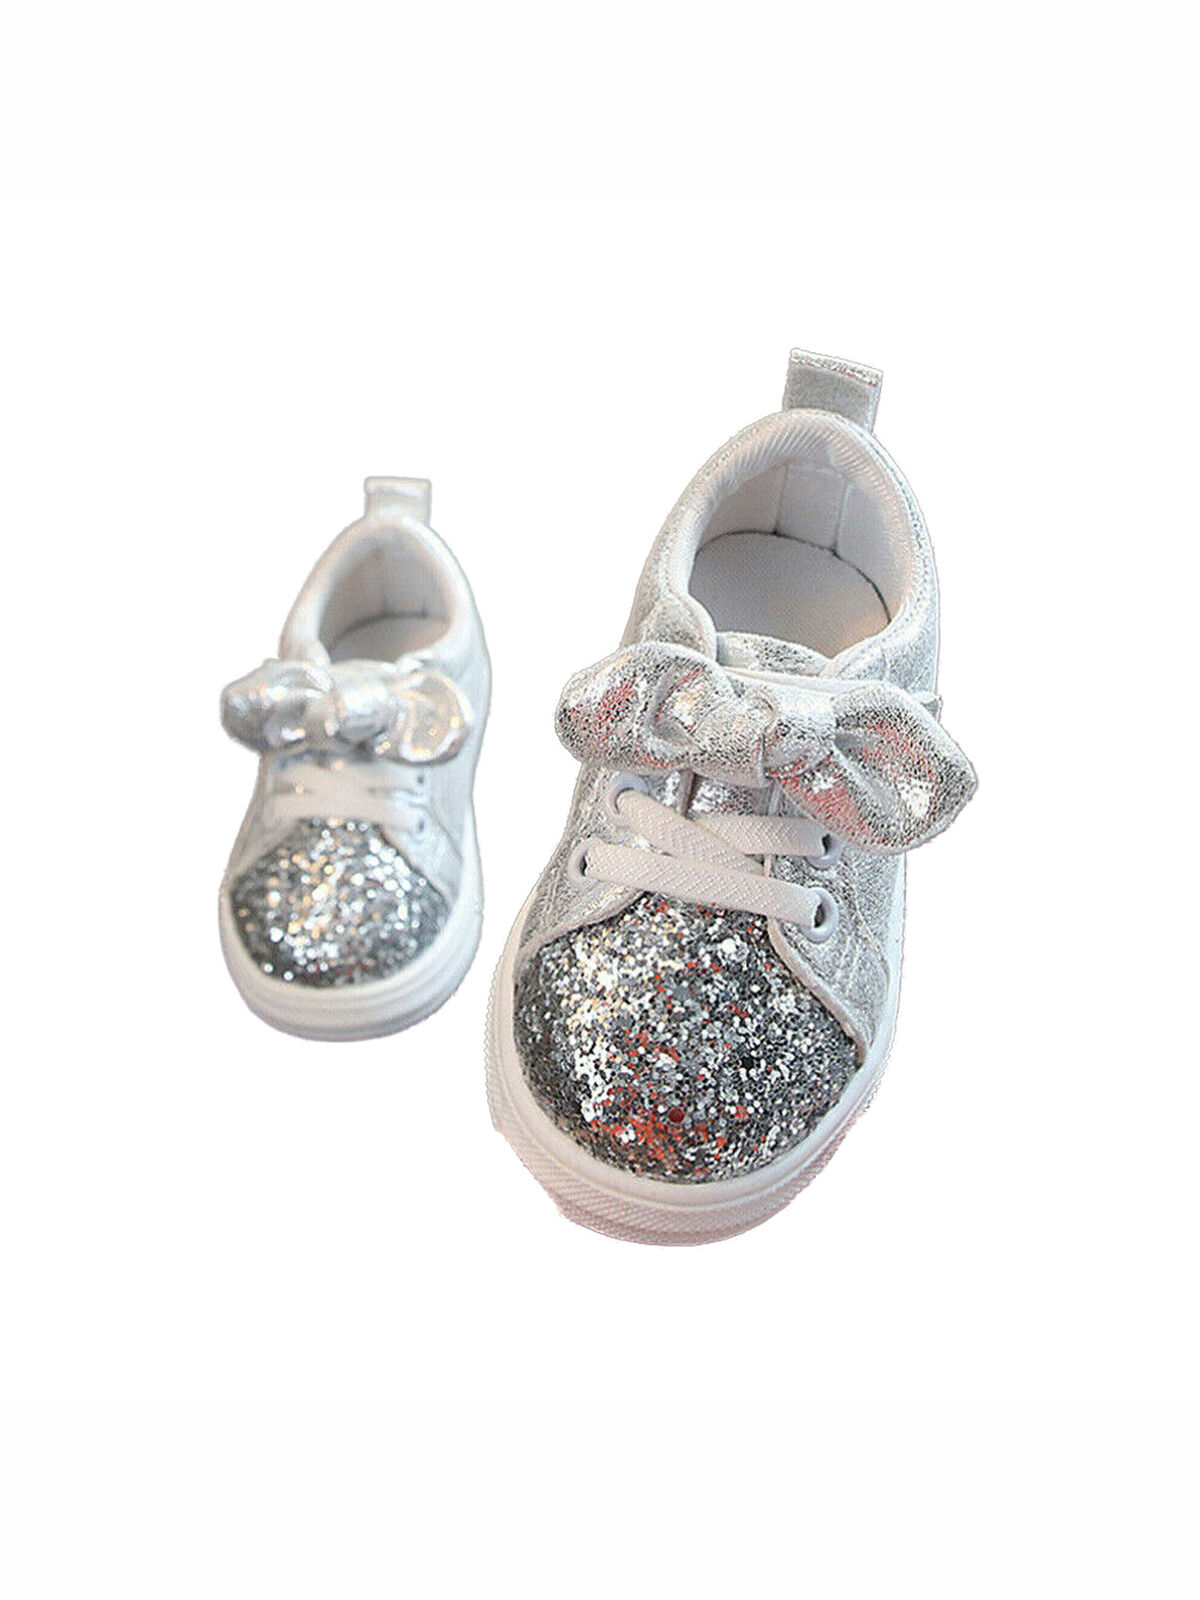 Cute Girls Casual Shoes Sneakers Toddler Baby Girls Bow Sequin Crib Trend Casual Shoes Kids Children Anti Slip Pink Dress Shoes - image 4 of 6